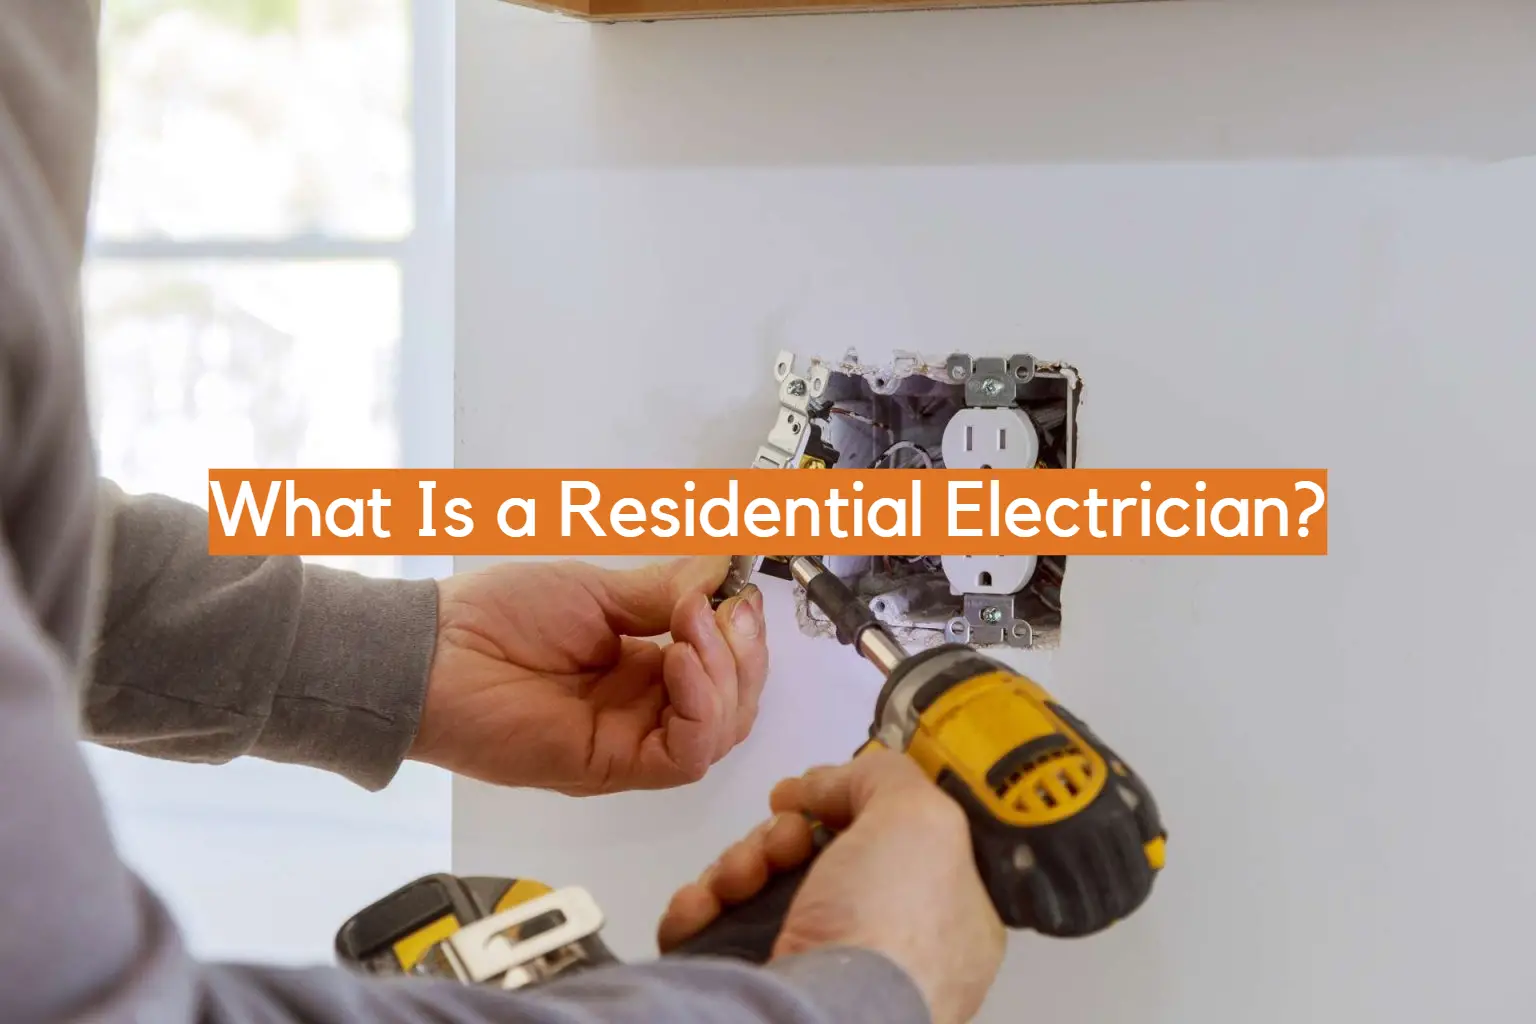 What Is a Residential Electrician?